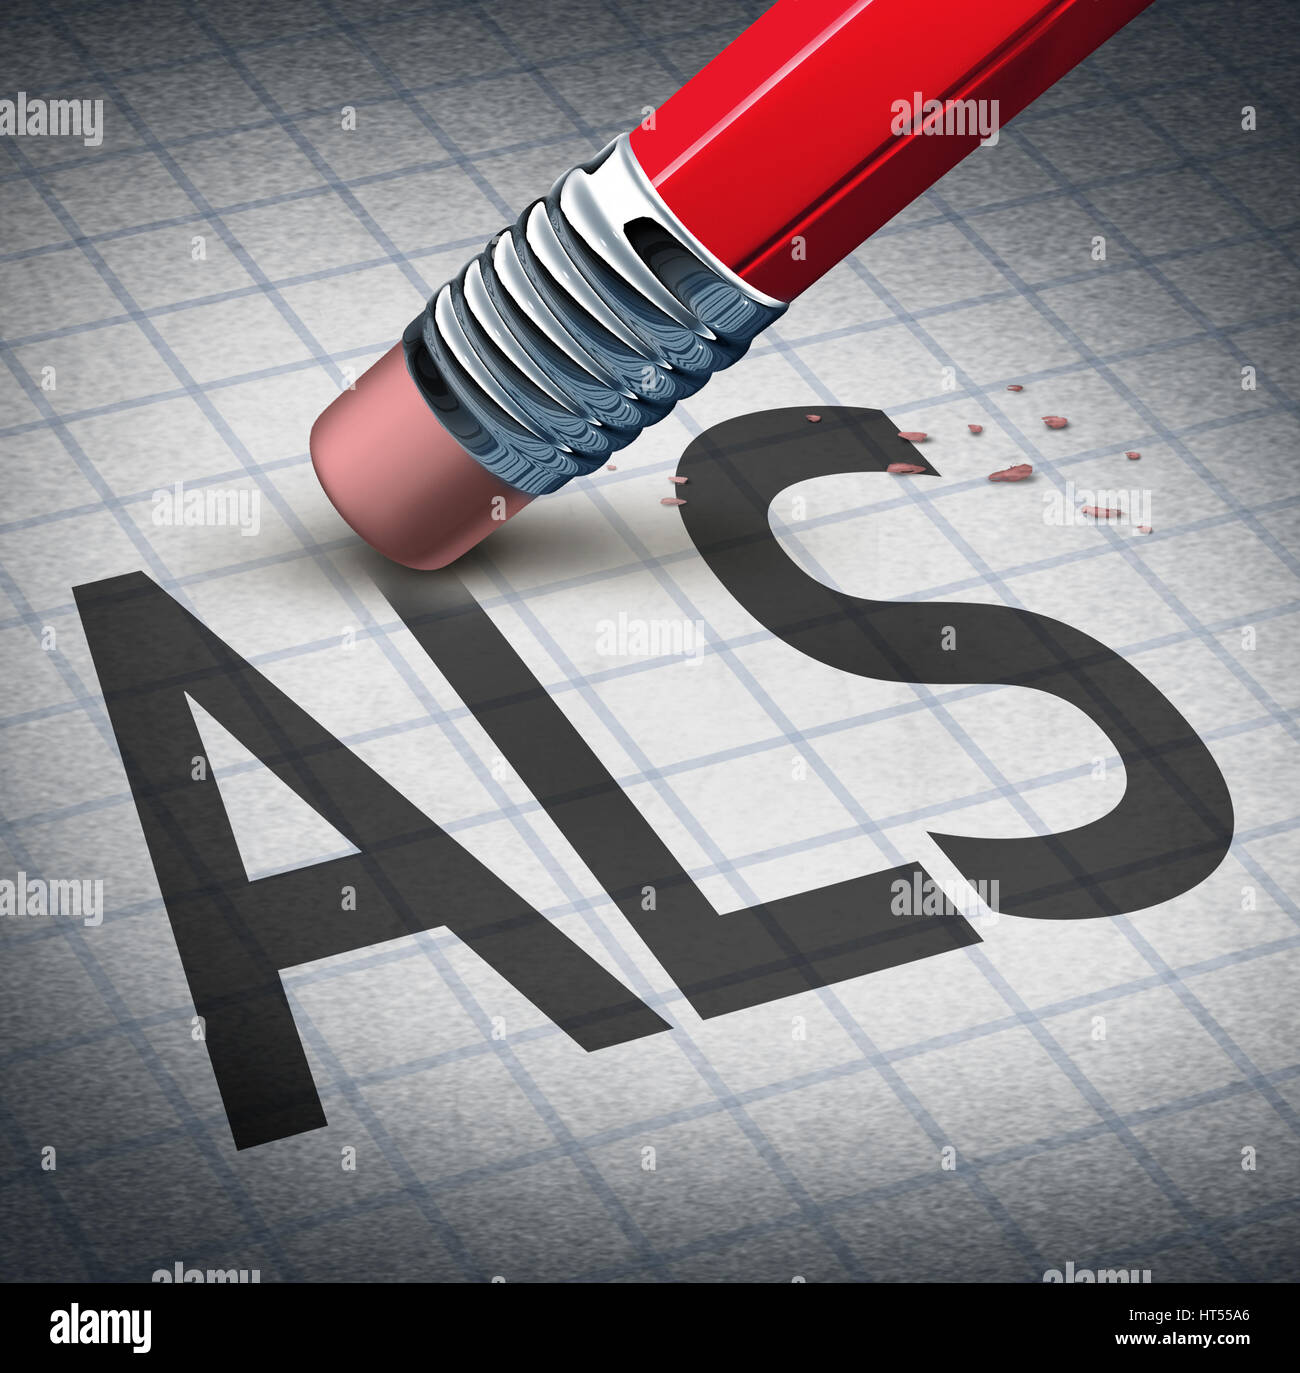 Amyotrophic laterals sclerosis or ALS as a neurodegenerative disease therapy and cure concept as a pencil eraser erasing the ailment. Stock Photo